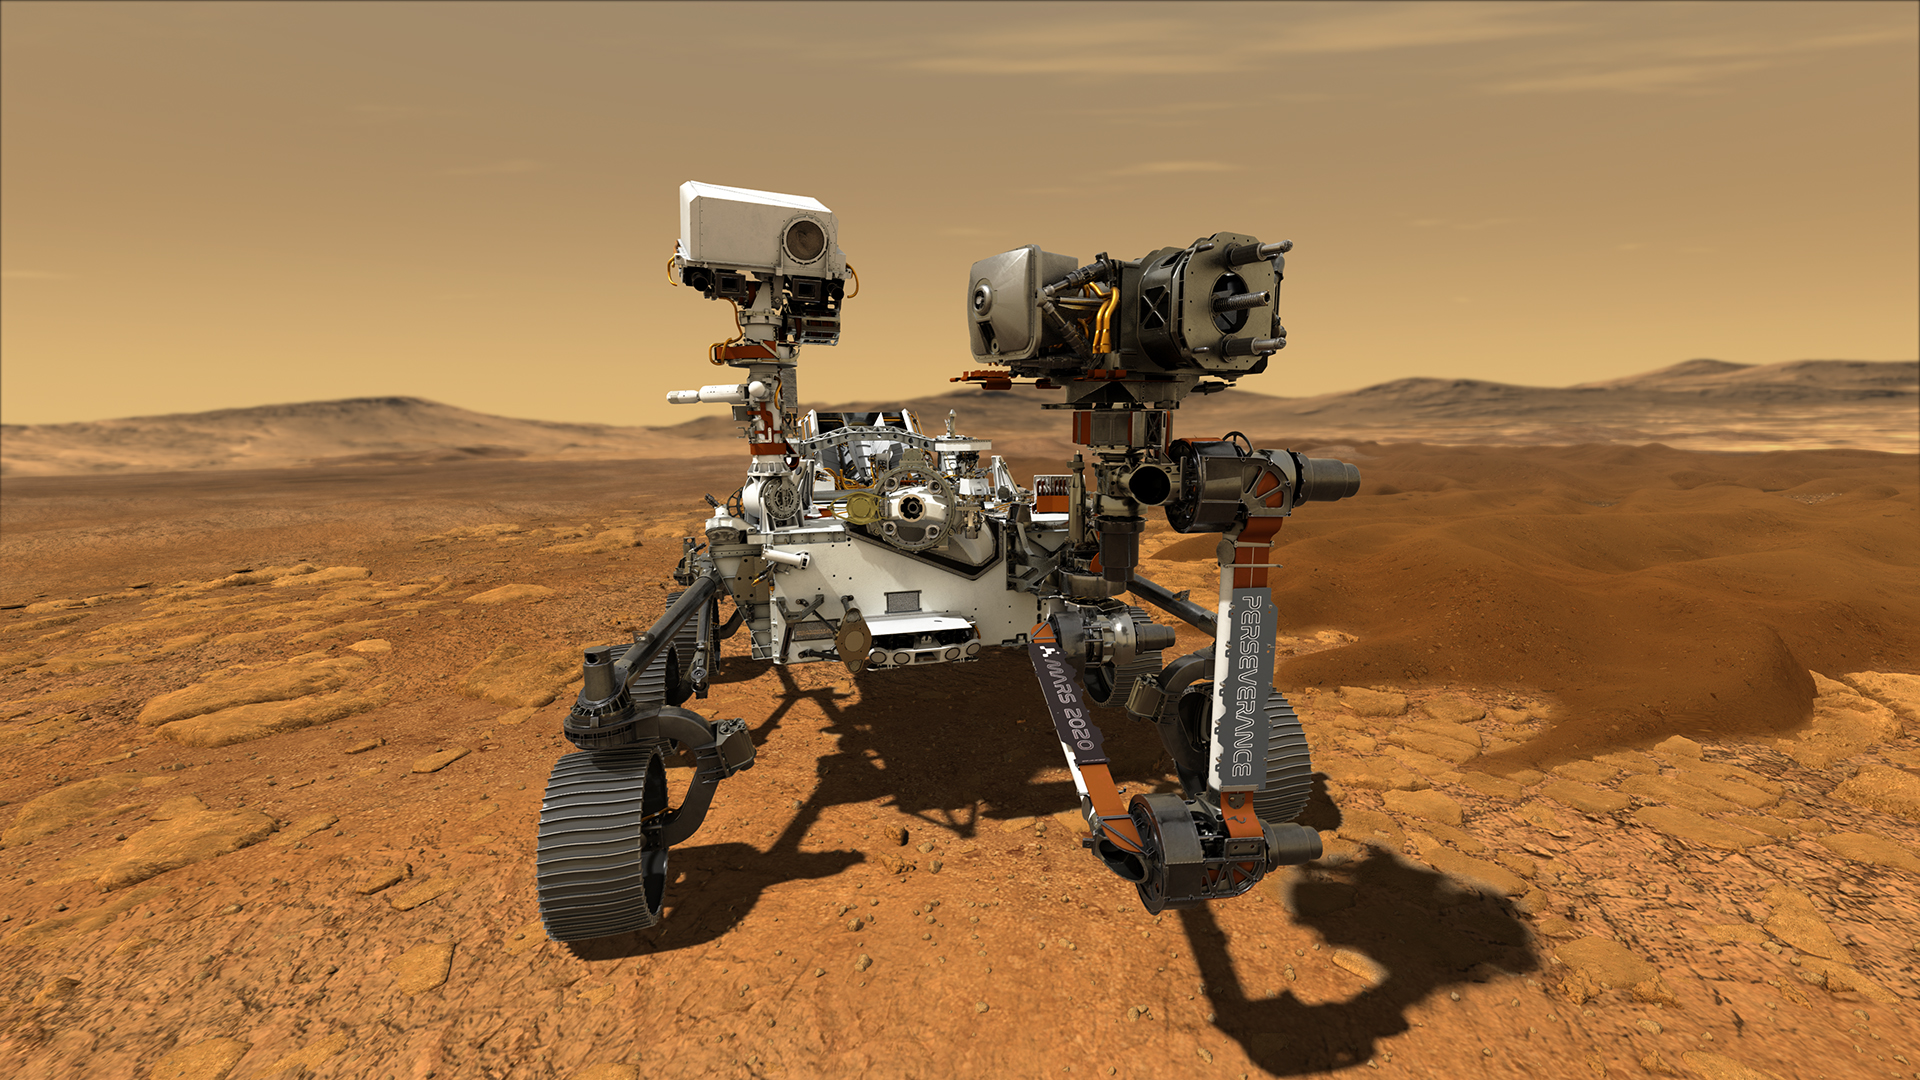 In photography: NASA’s Mars Perseverance rover mission to the Purple Planet